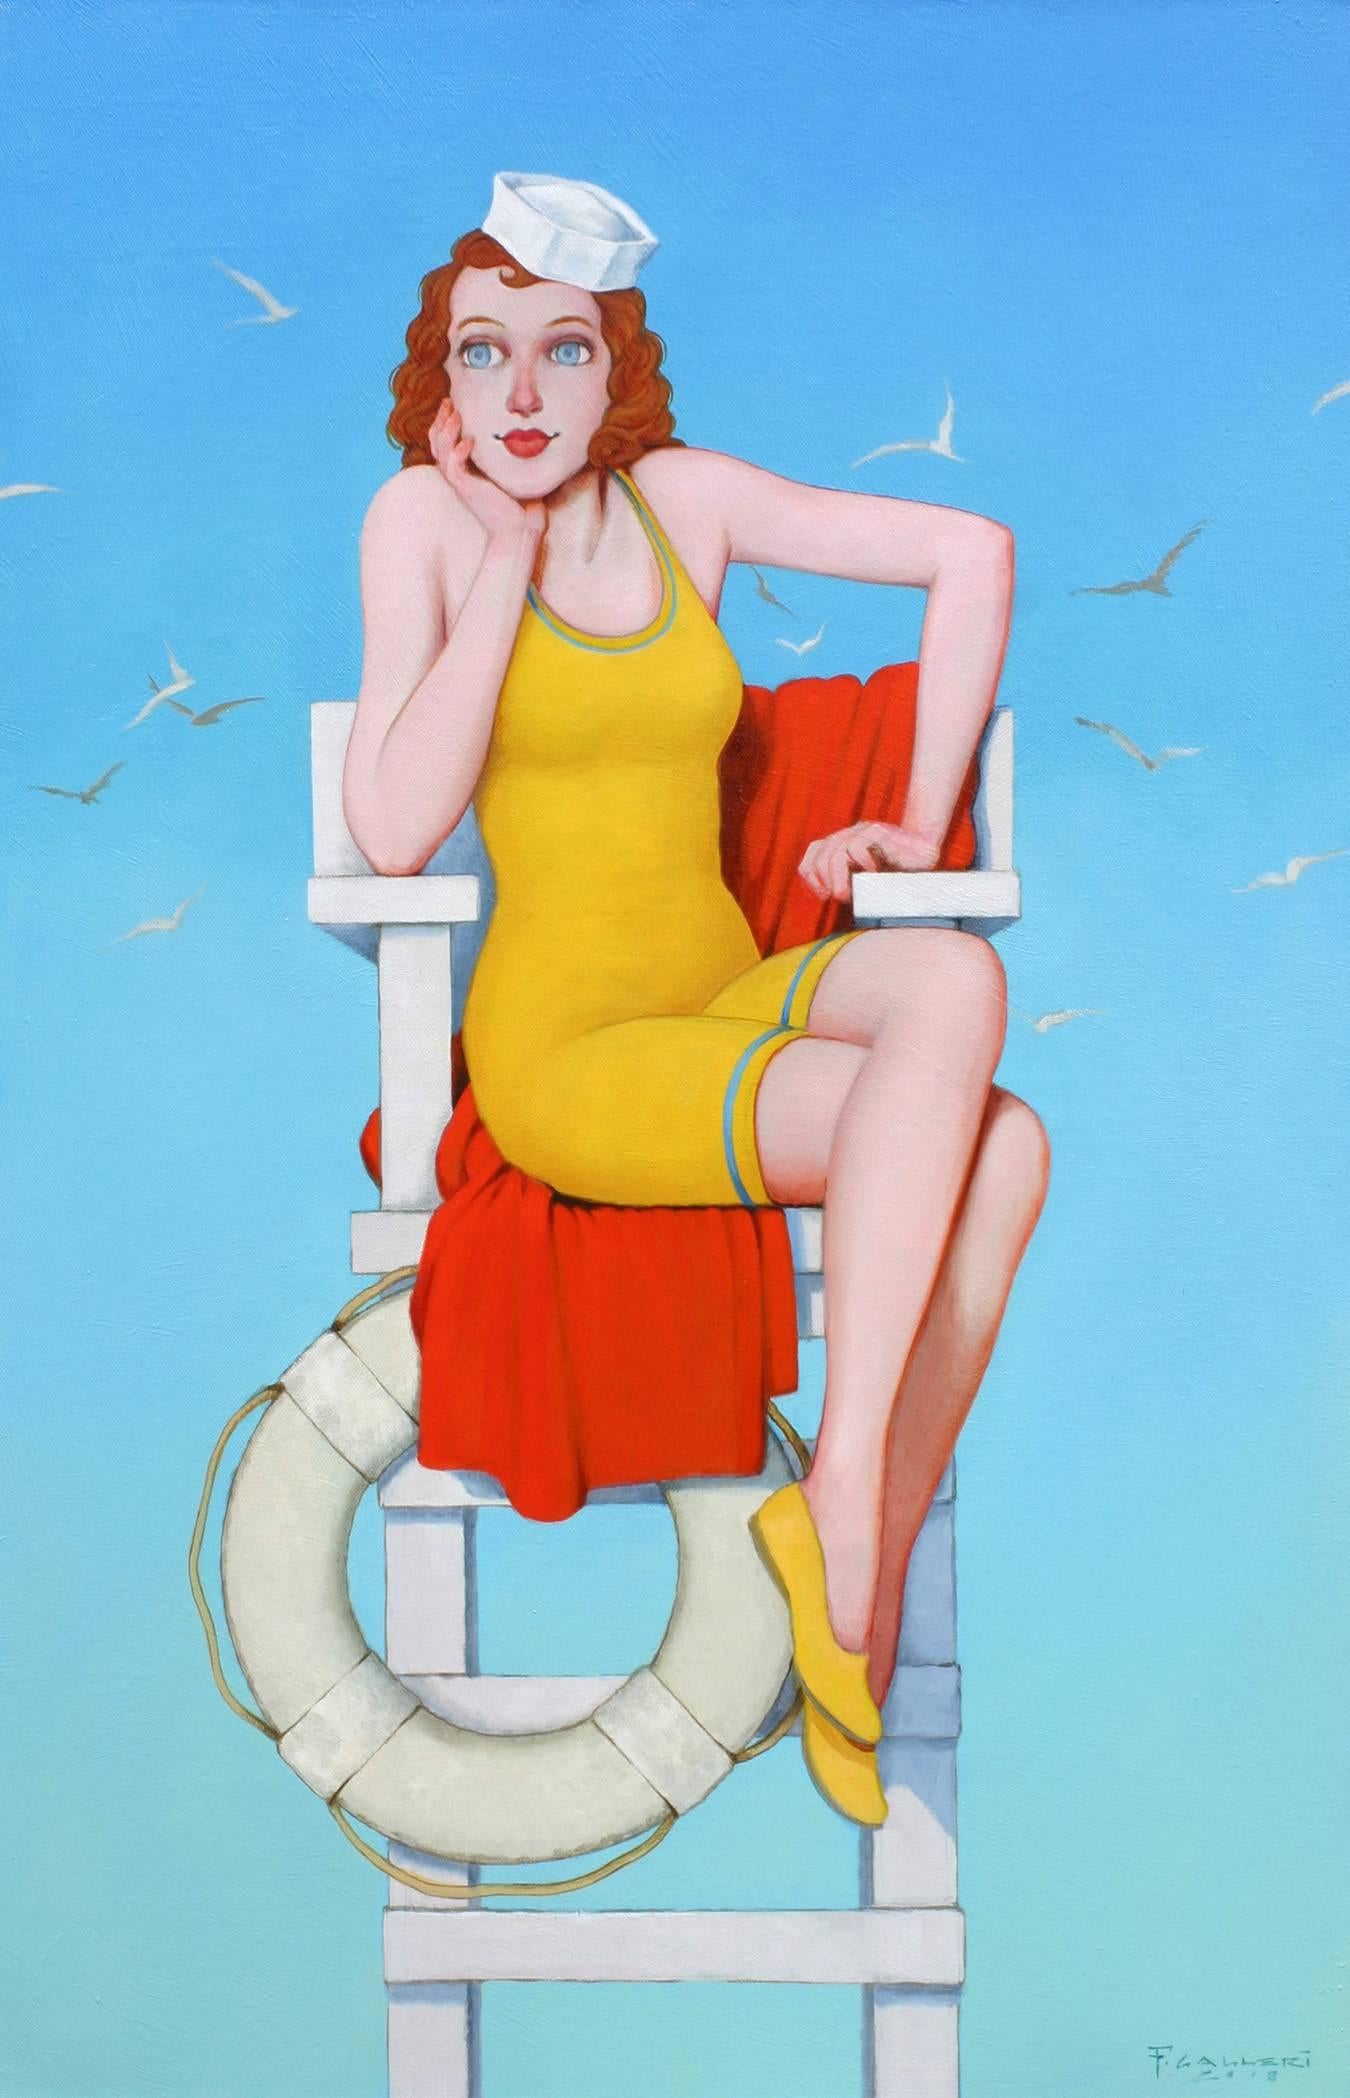 Fred Calleri Figurative Painting - "Sand Castles" Woman in Vintage Lifeguard Chair Yellow Red with Blue Sky